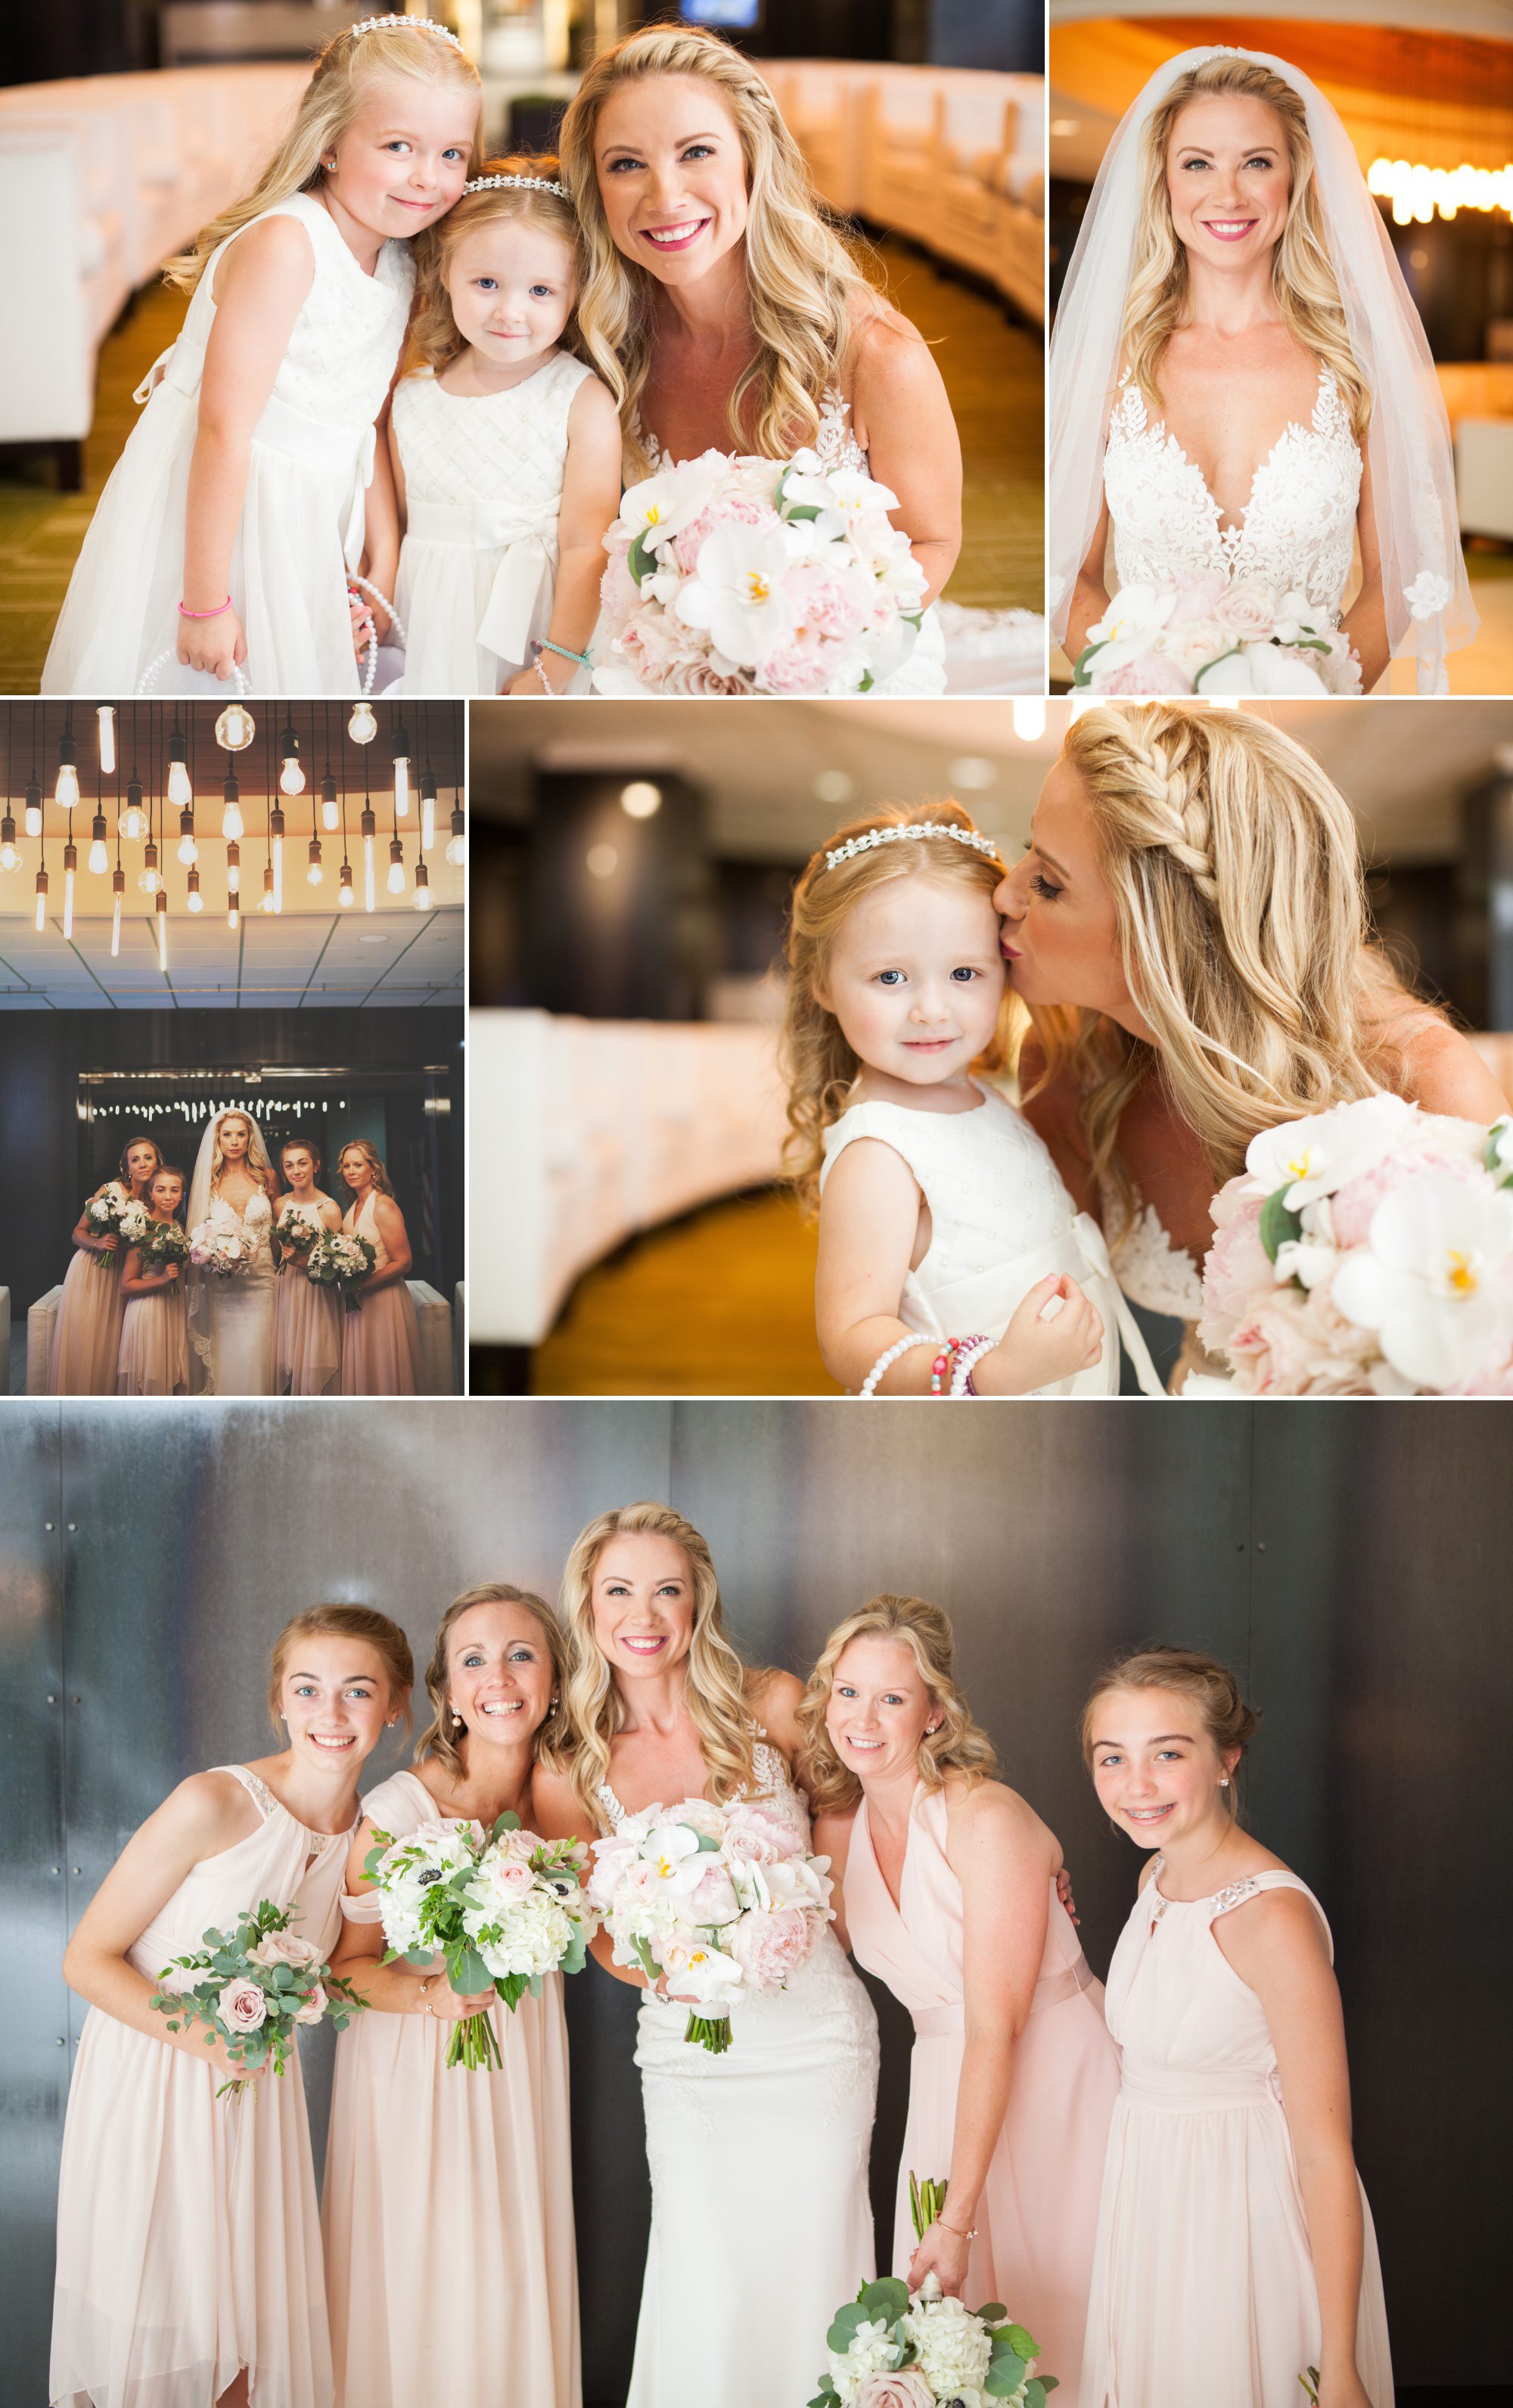 Photos of bride and bridesmaids, flower girl before wedding ceremony and reception at City Club Nashville. Photos by Krista Lee Photography. 